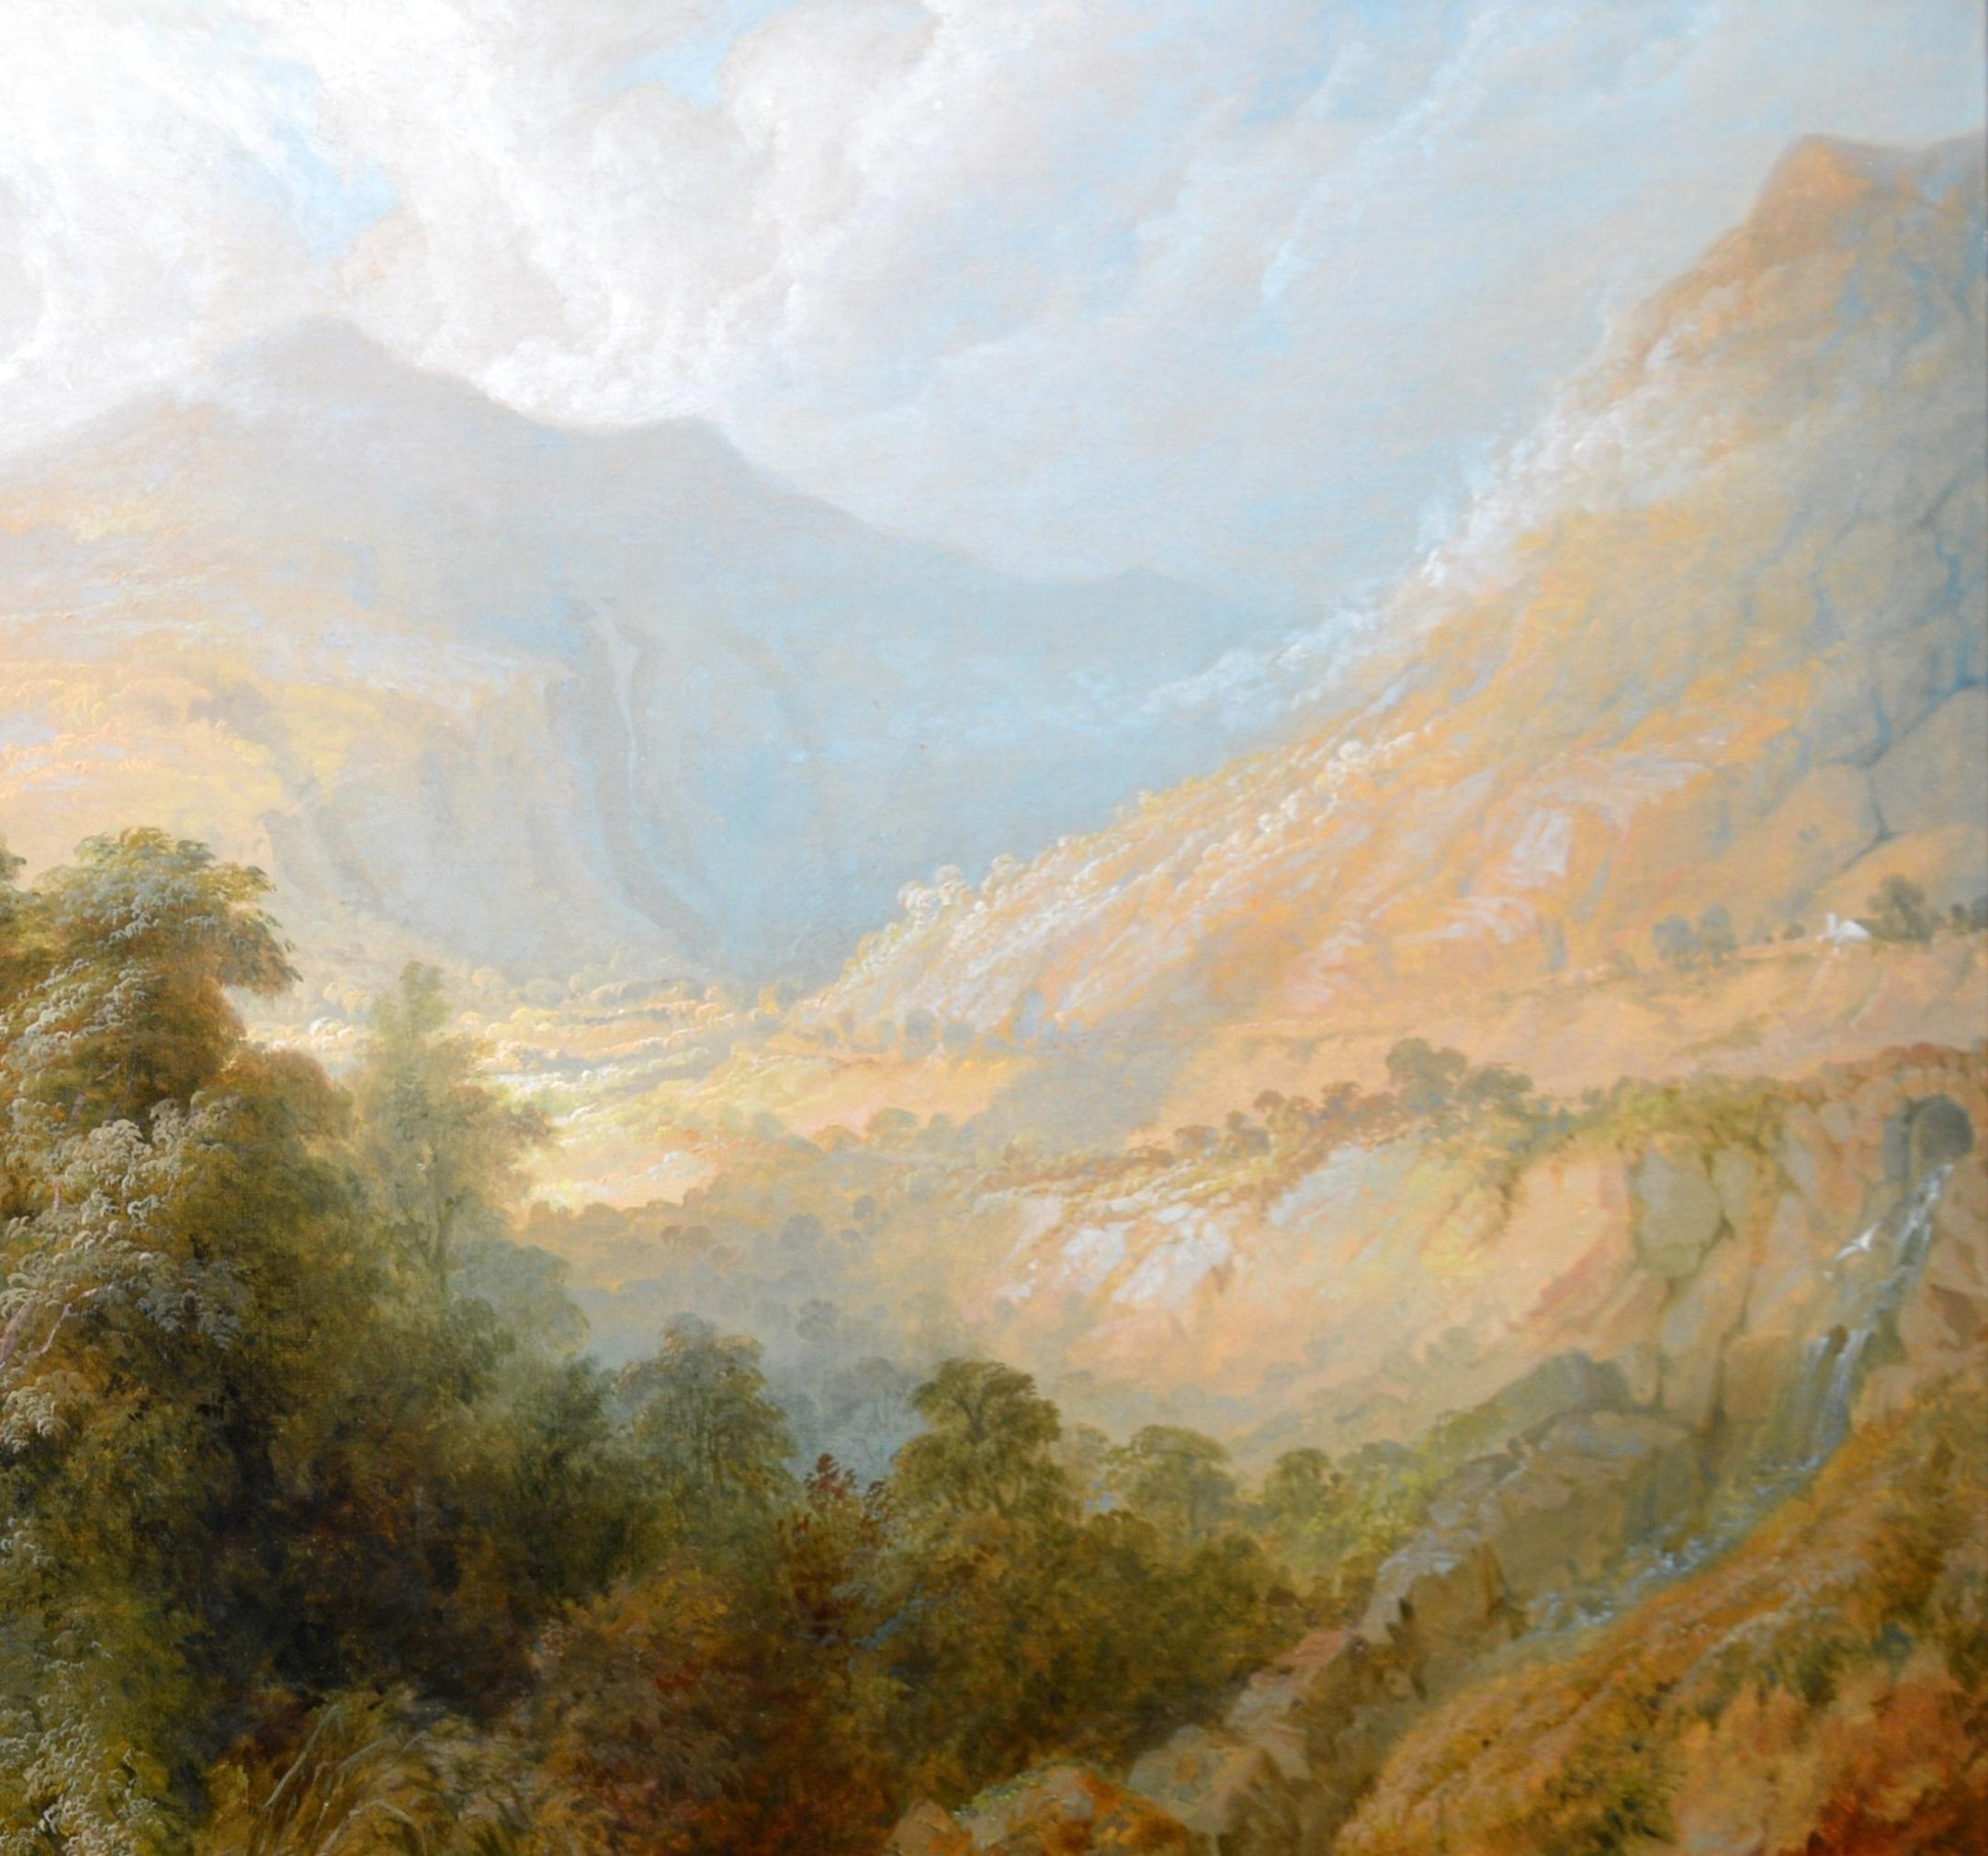 Vale of the Conwy - Large 19th Century Welsh Mountain Landscape Oil Painting - Brown Figurative Painting by Samuel Lines